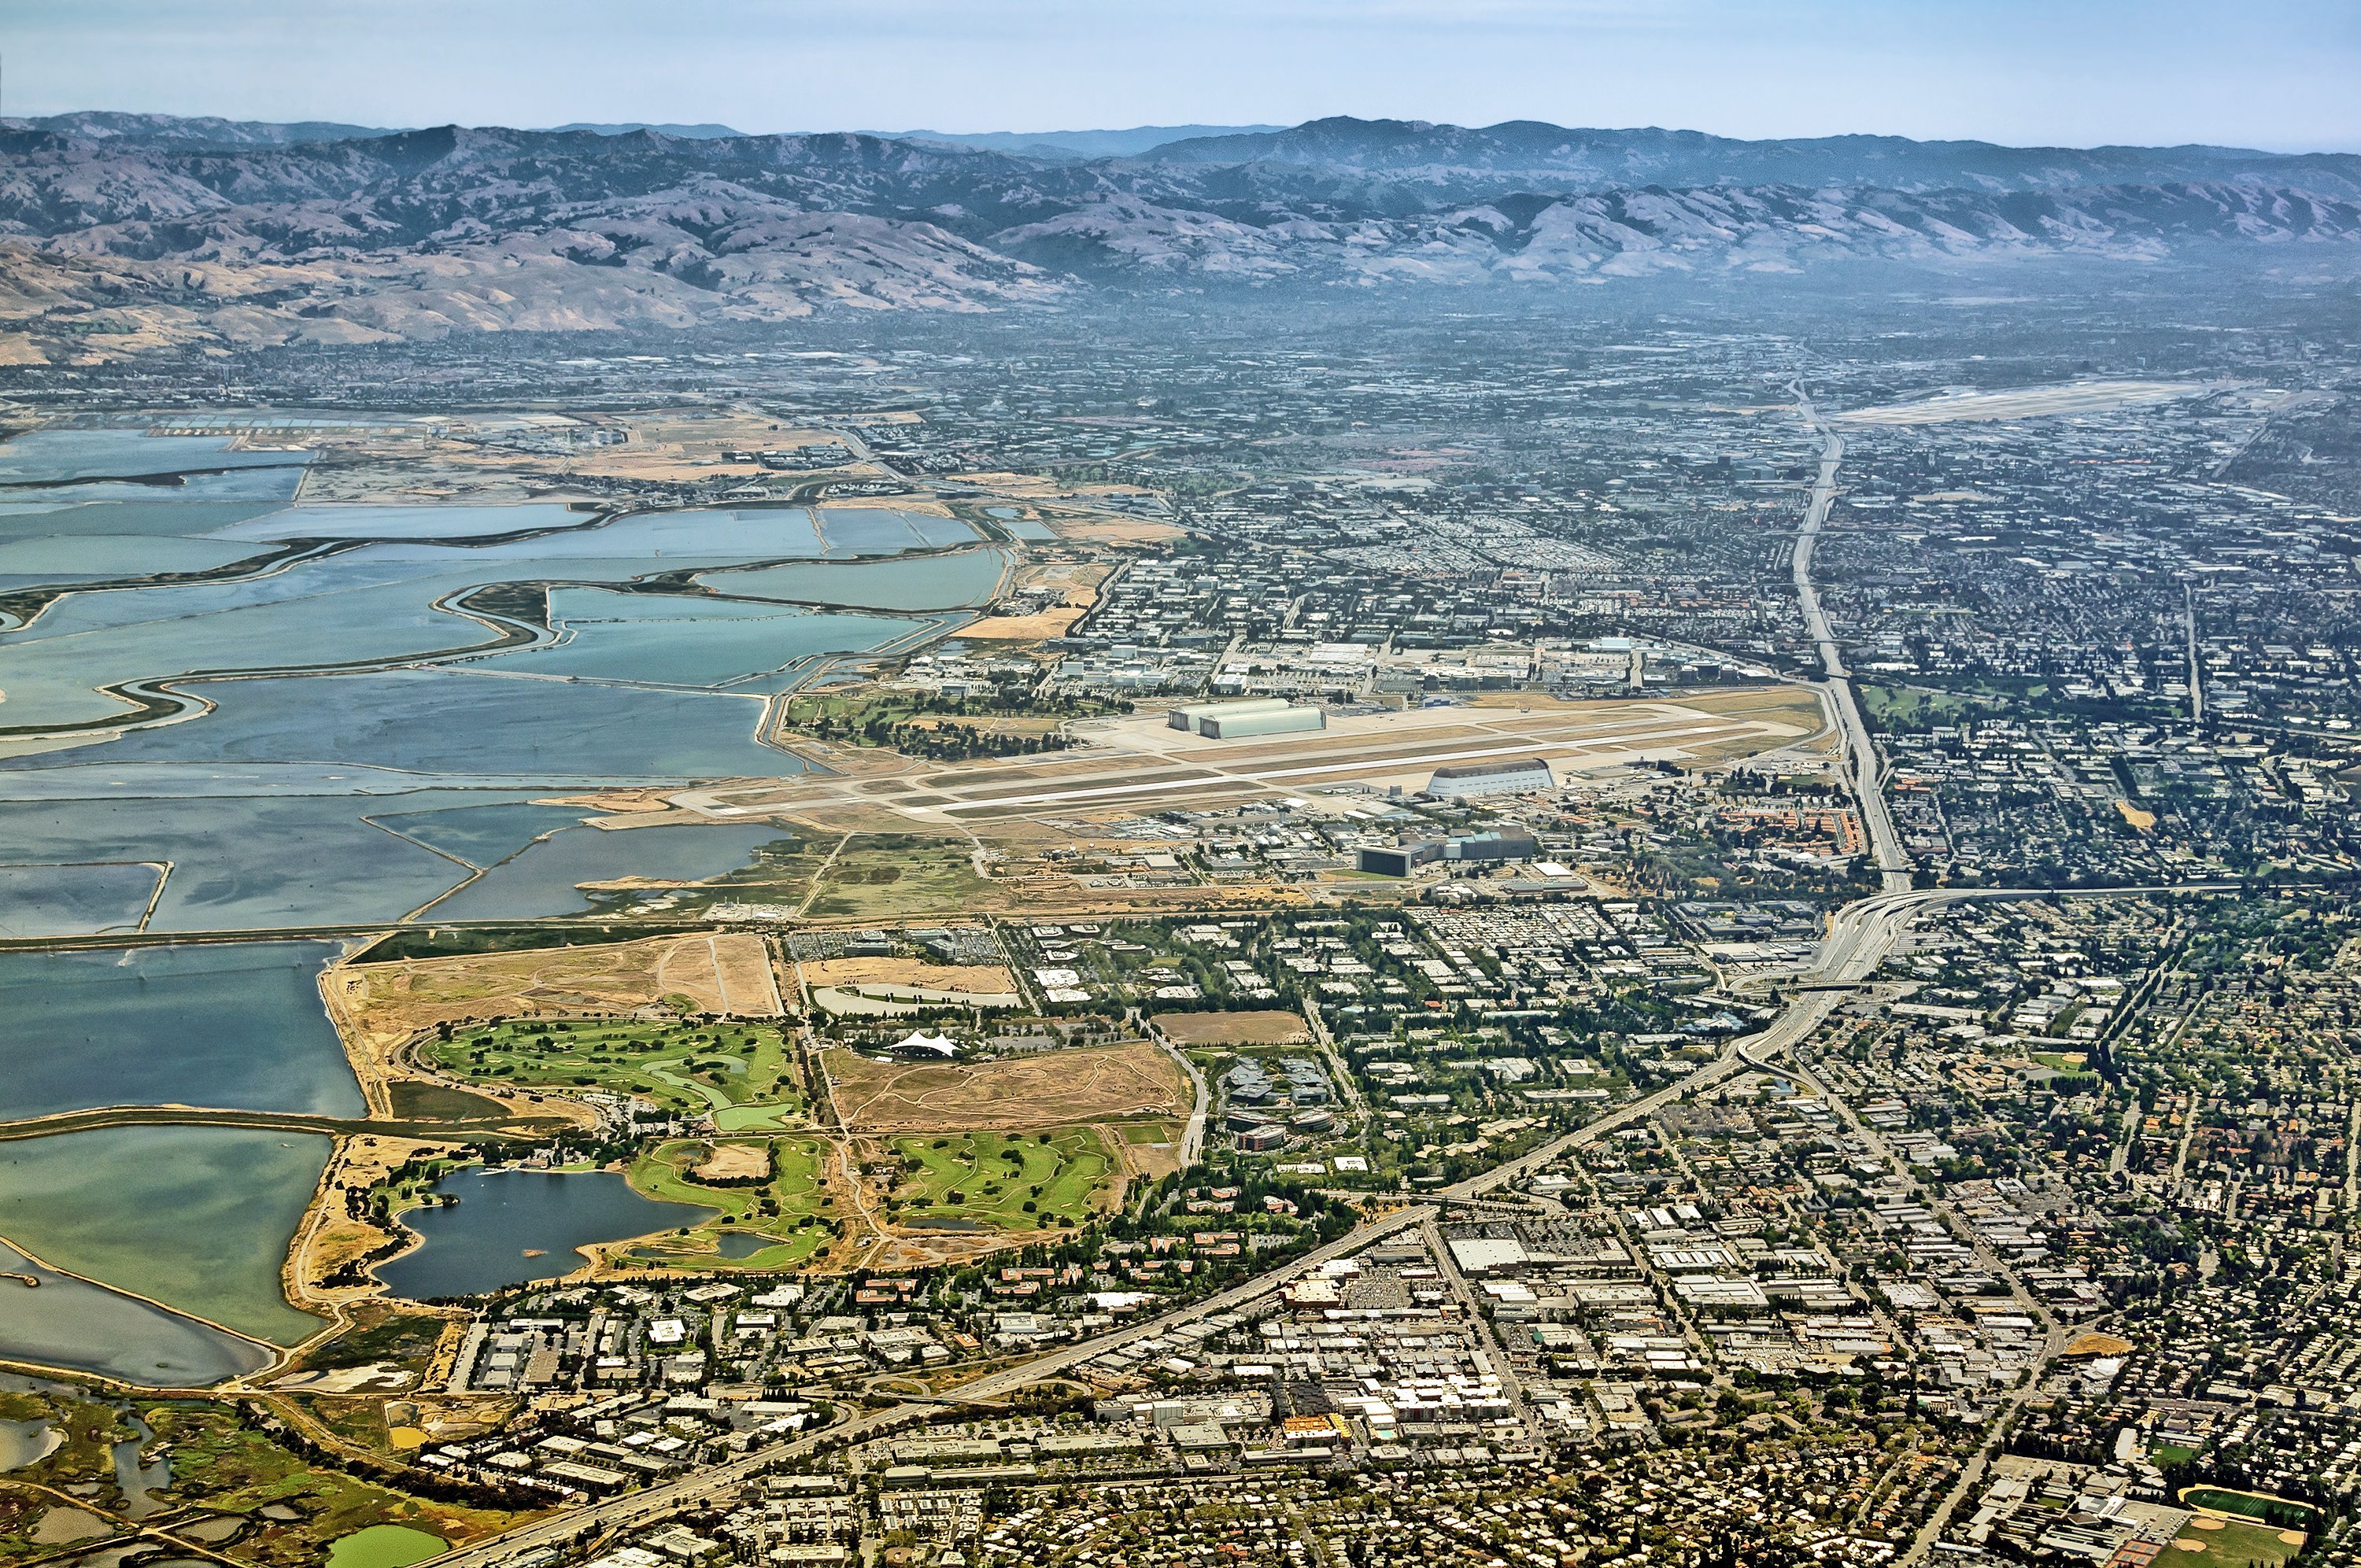 Aerial view of Baylands from Palo Alto to San Jose